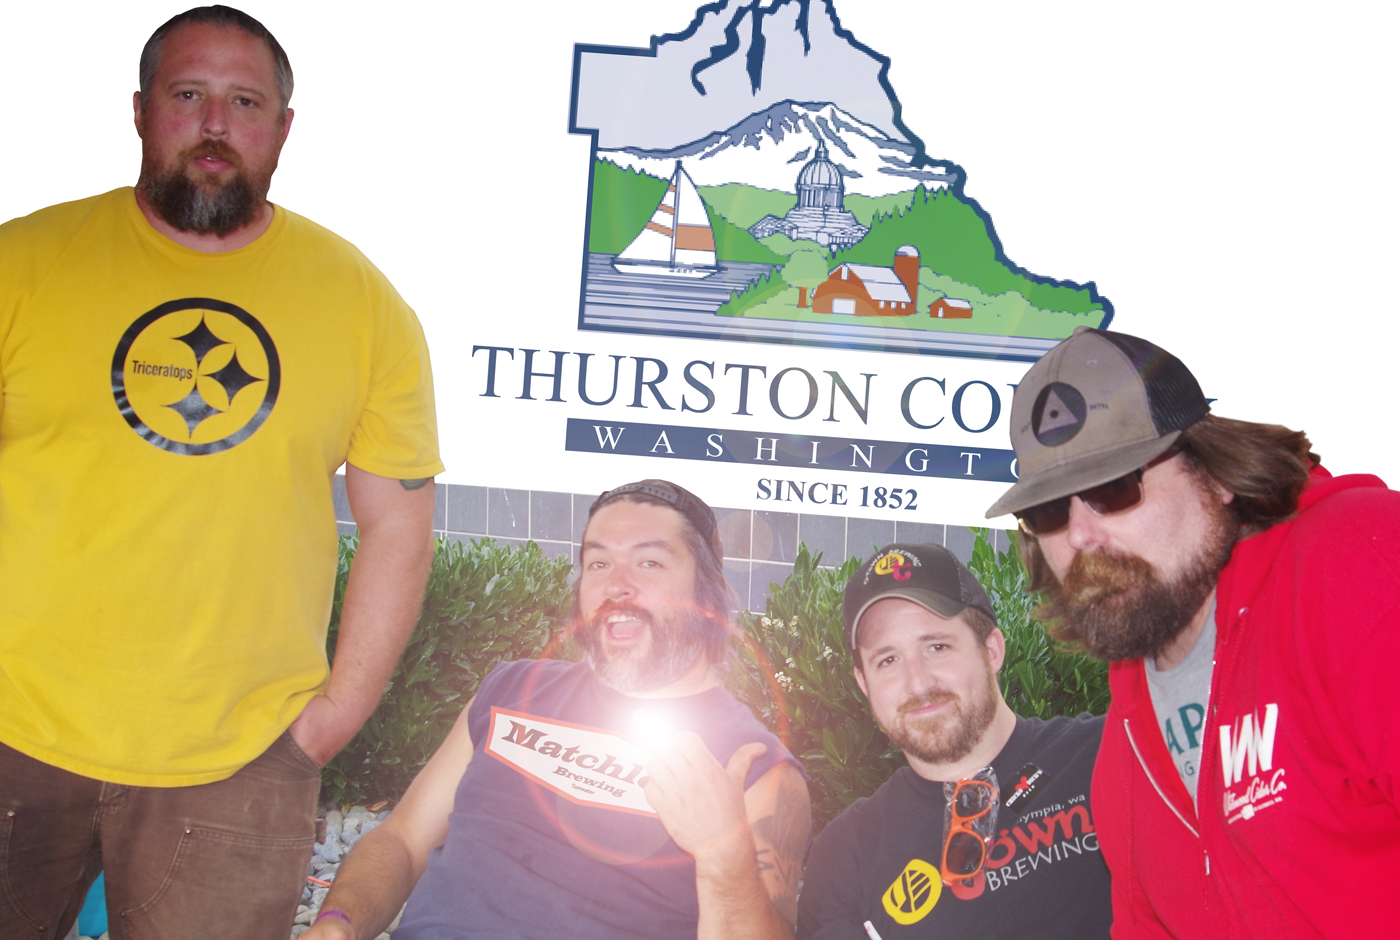 TACOMA PREFUNK WEDNESDAY AUG 9 2017: Thurston County Craft Beer Tap